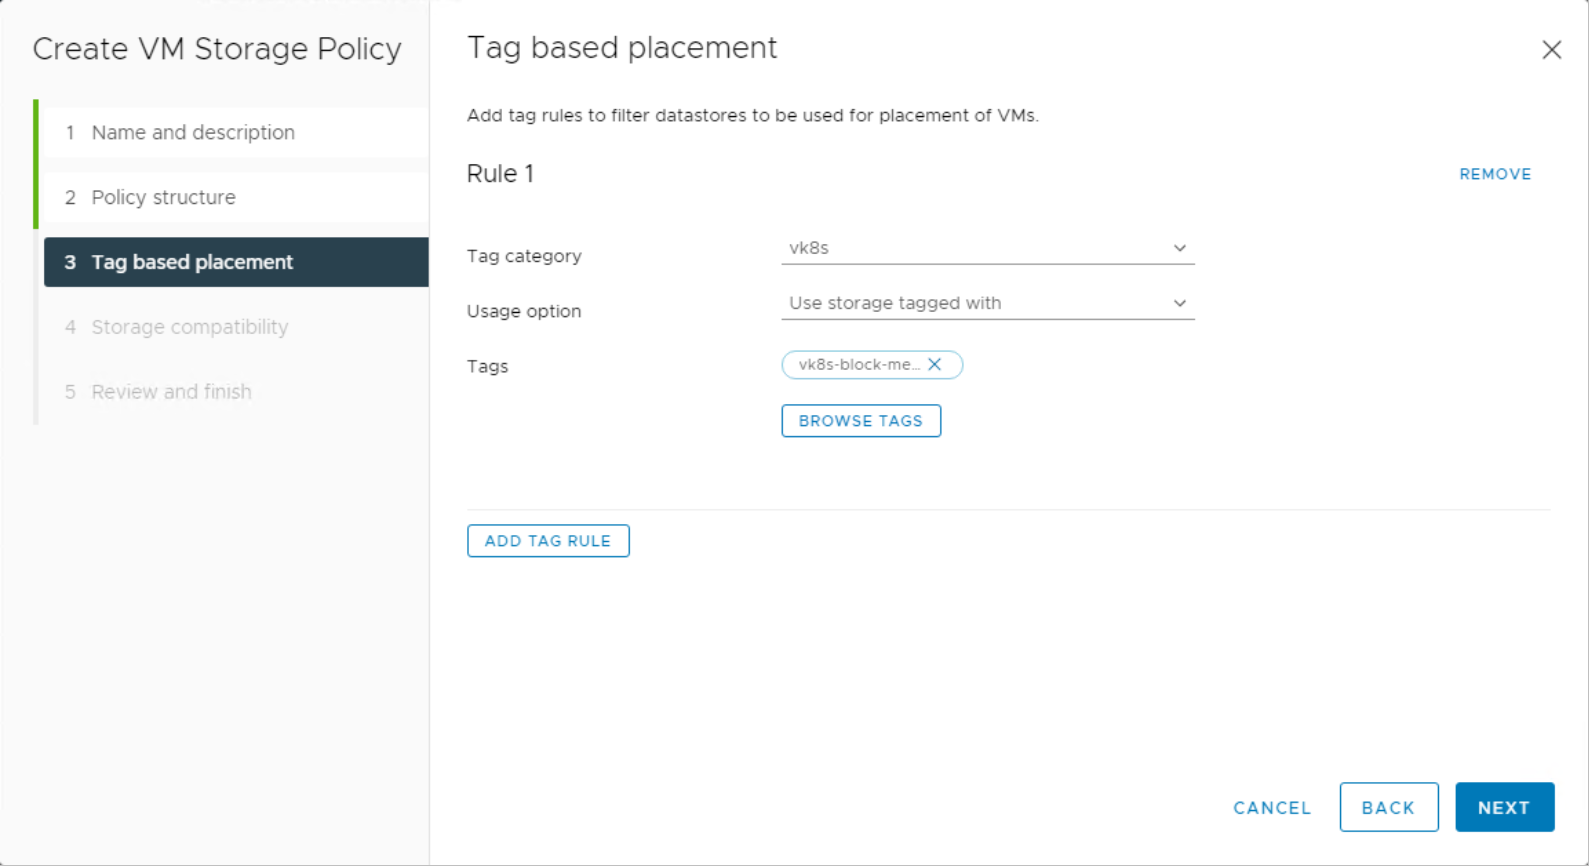 vSphere Client create VM Storage Policy workflow. Tag based placement vk8s tag category selected.